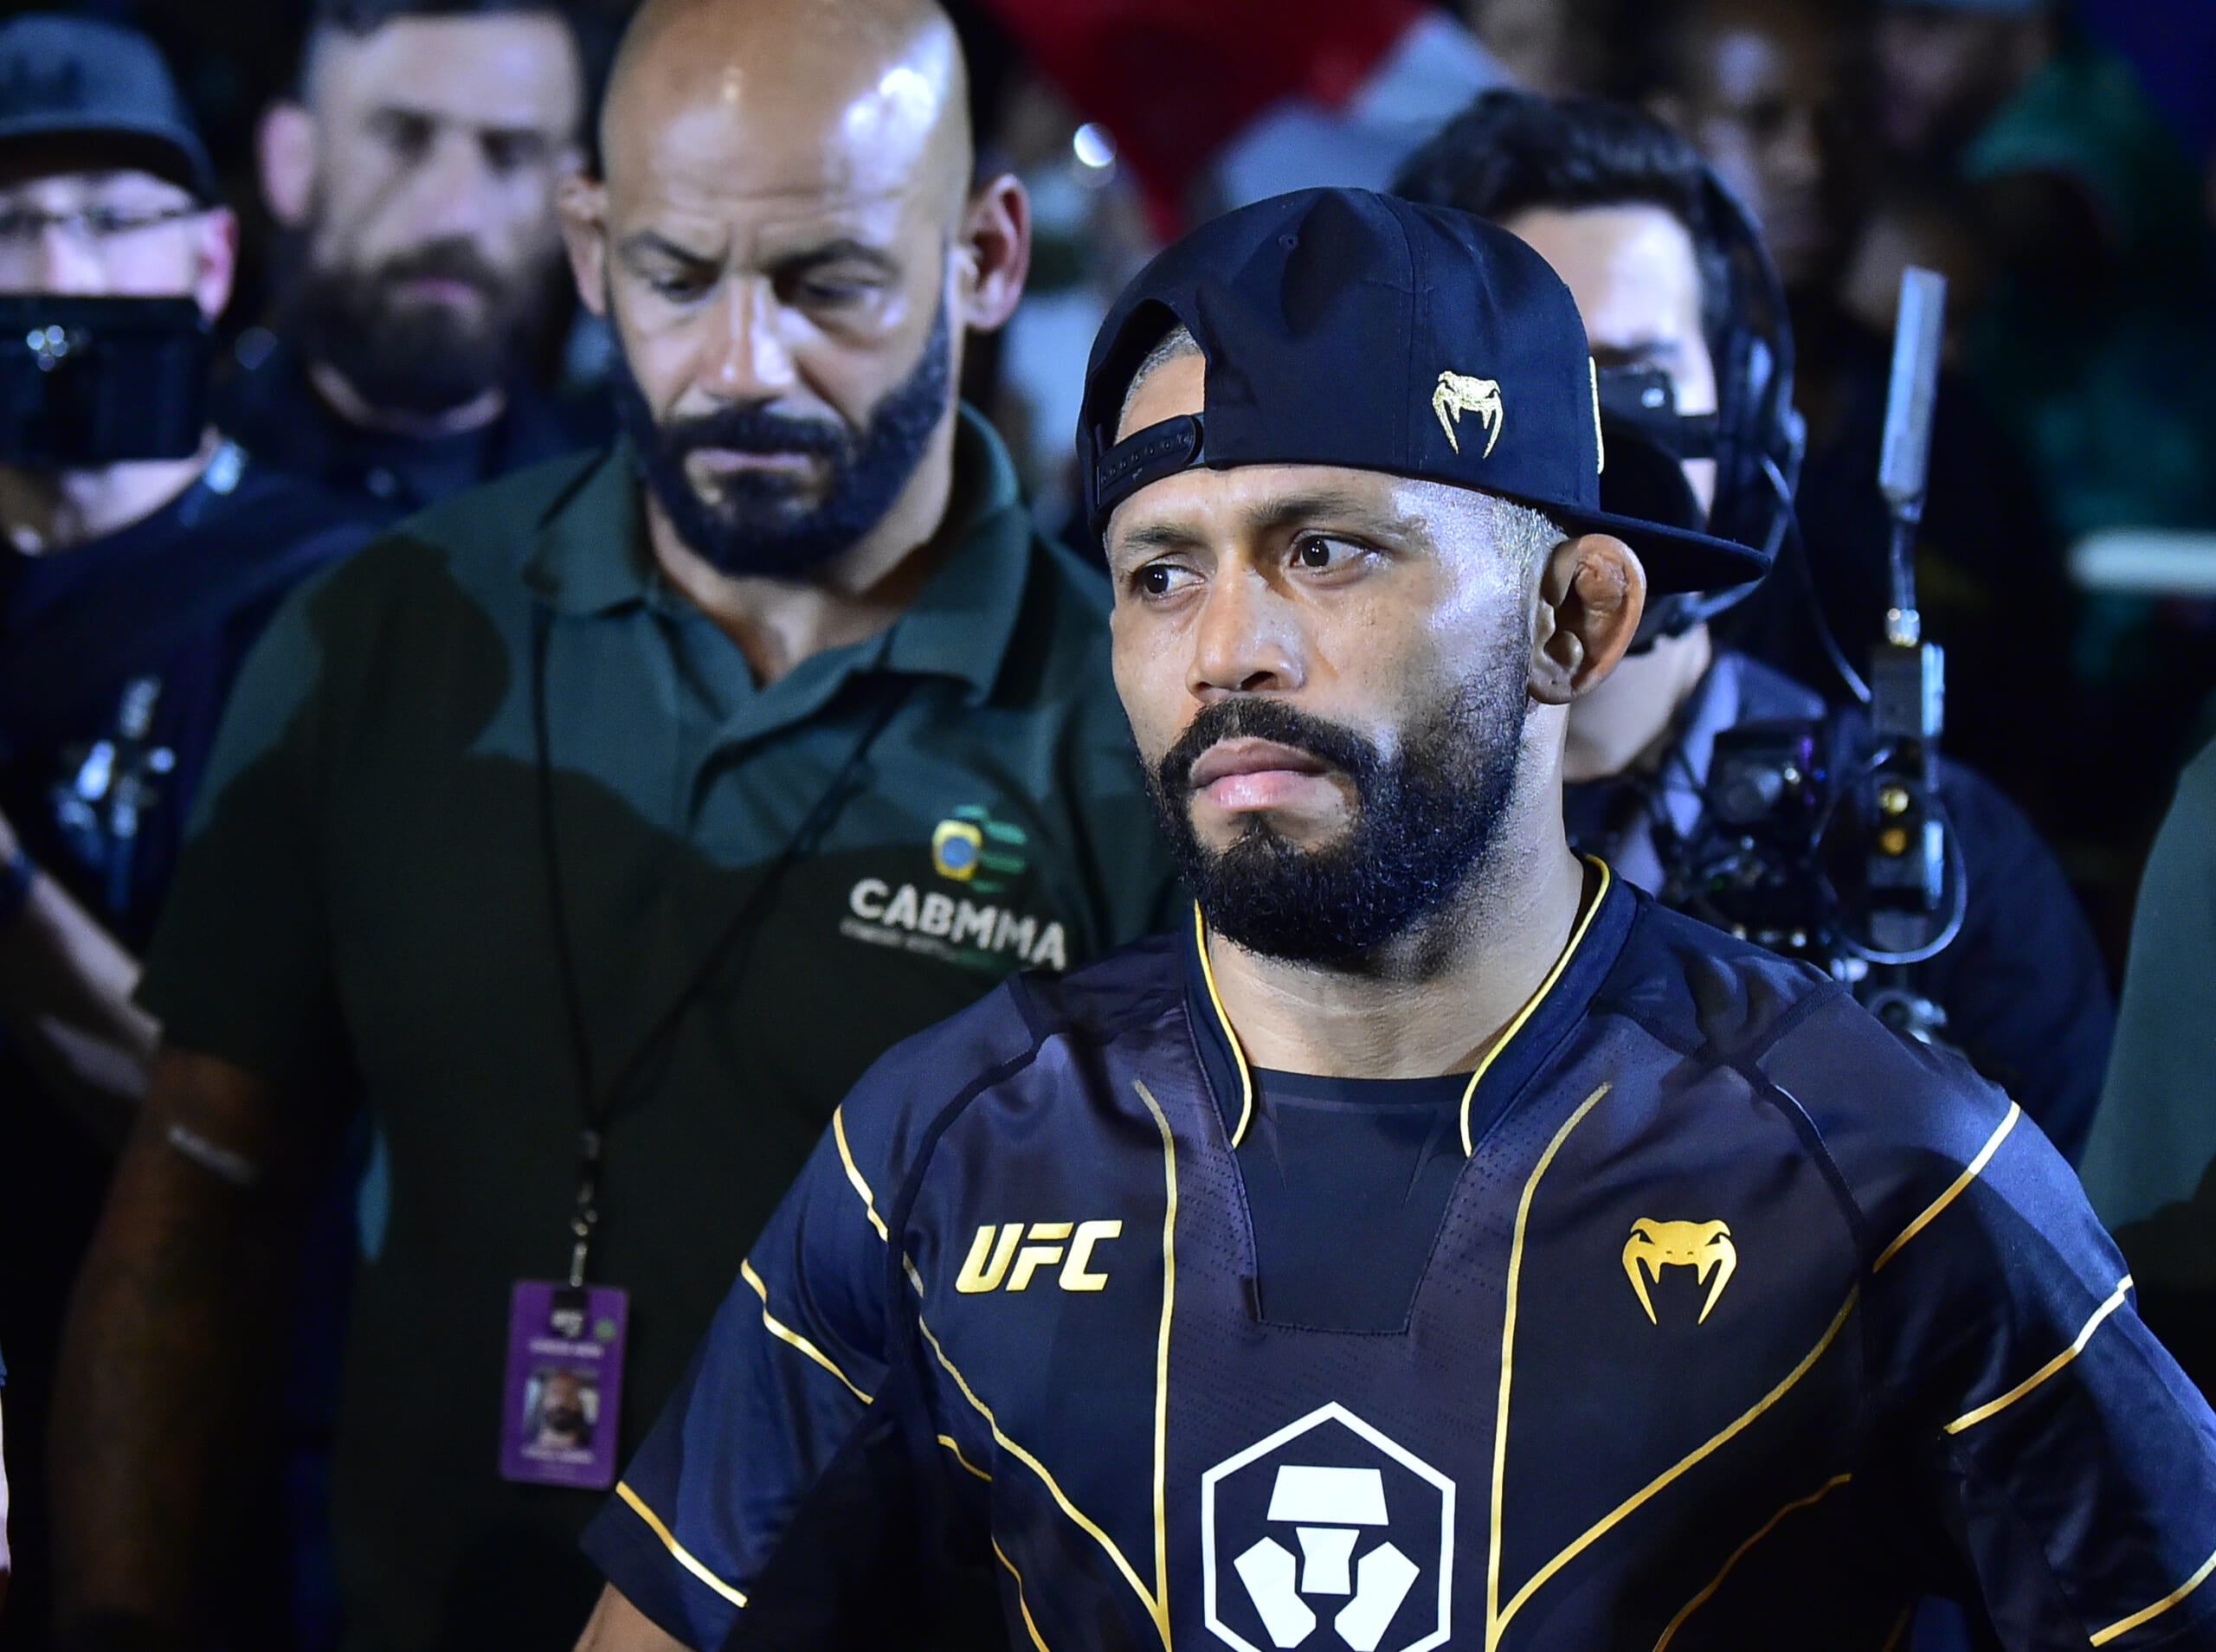 Former UFC flyweight champ Deiveson Figueiredo moves up to take on Rob Font in December